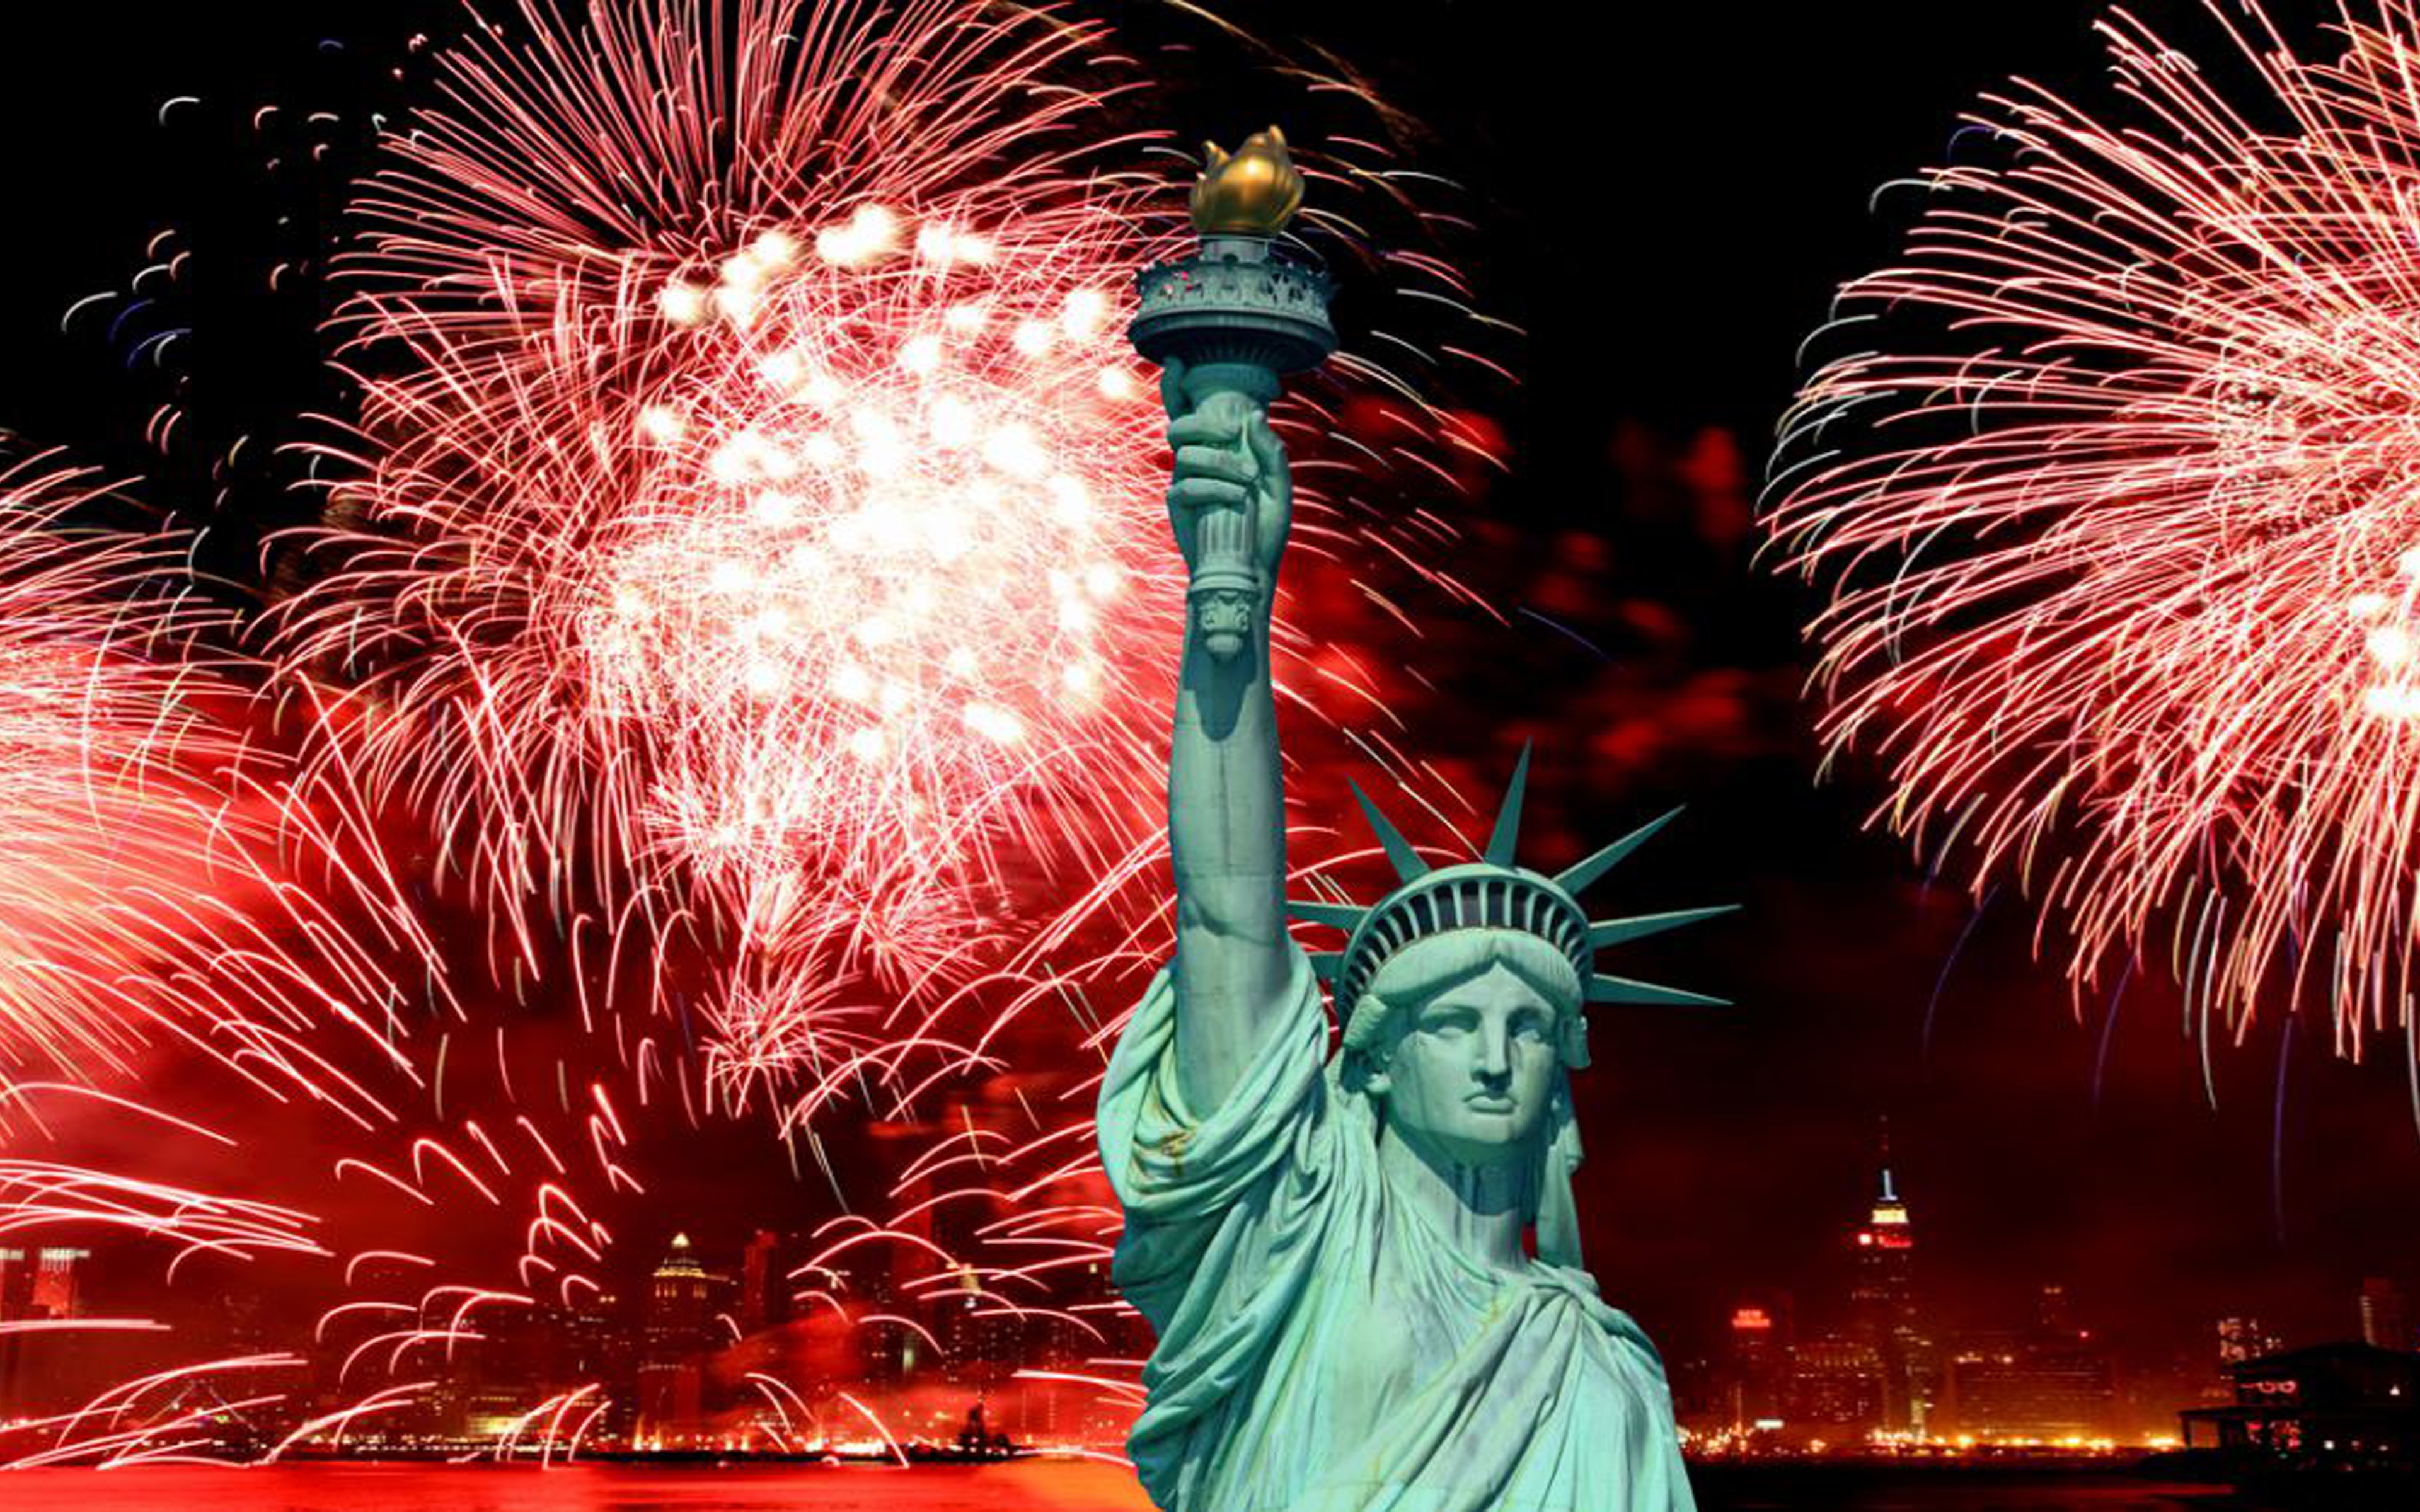 The Statue Of Liberty And 4th Of July Celebration Fireworks Desktop